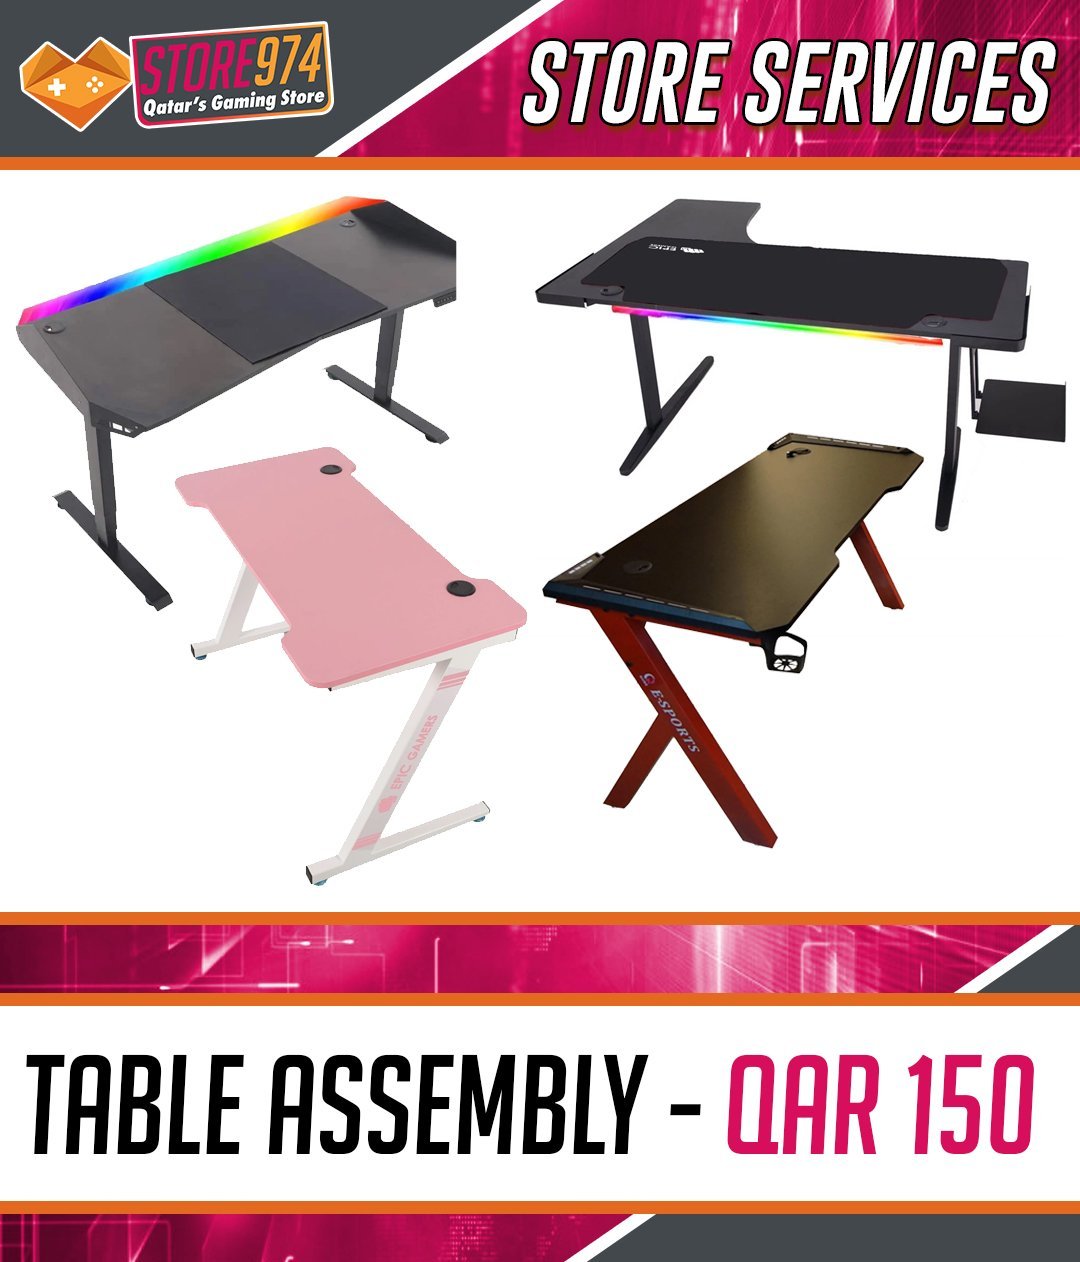 Table Assembly Service - Store 974 | ستور ٩٧٤